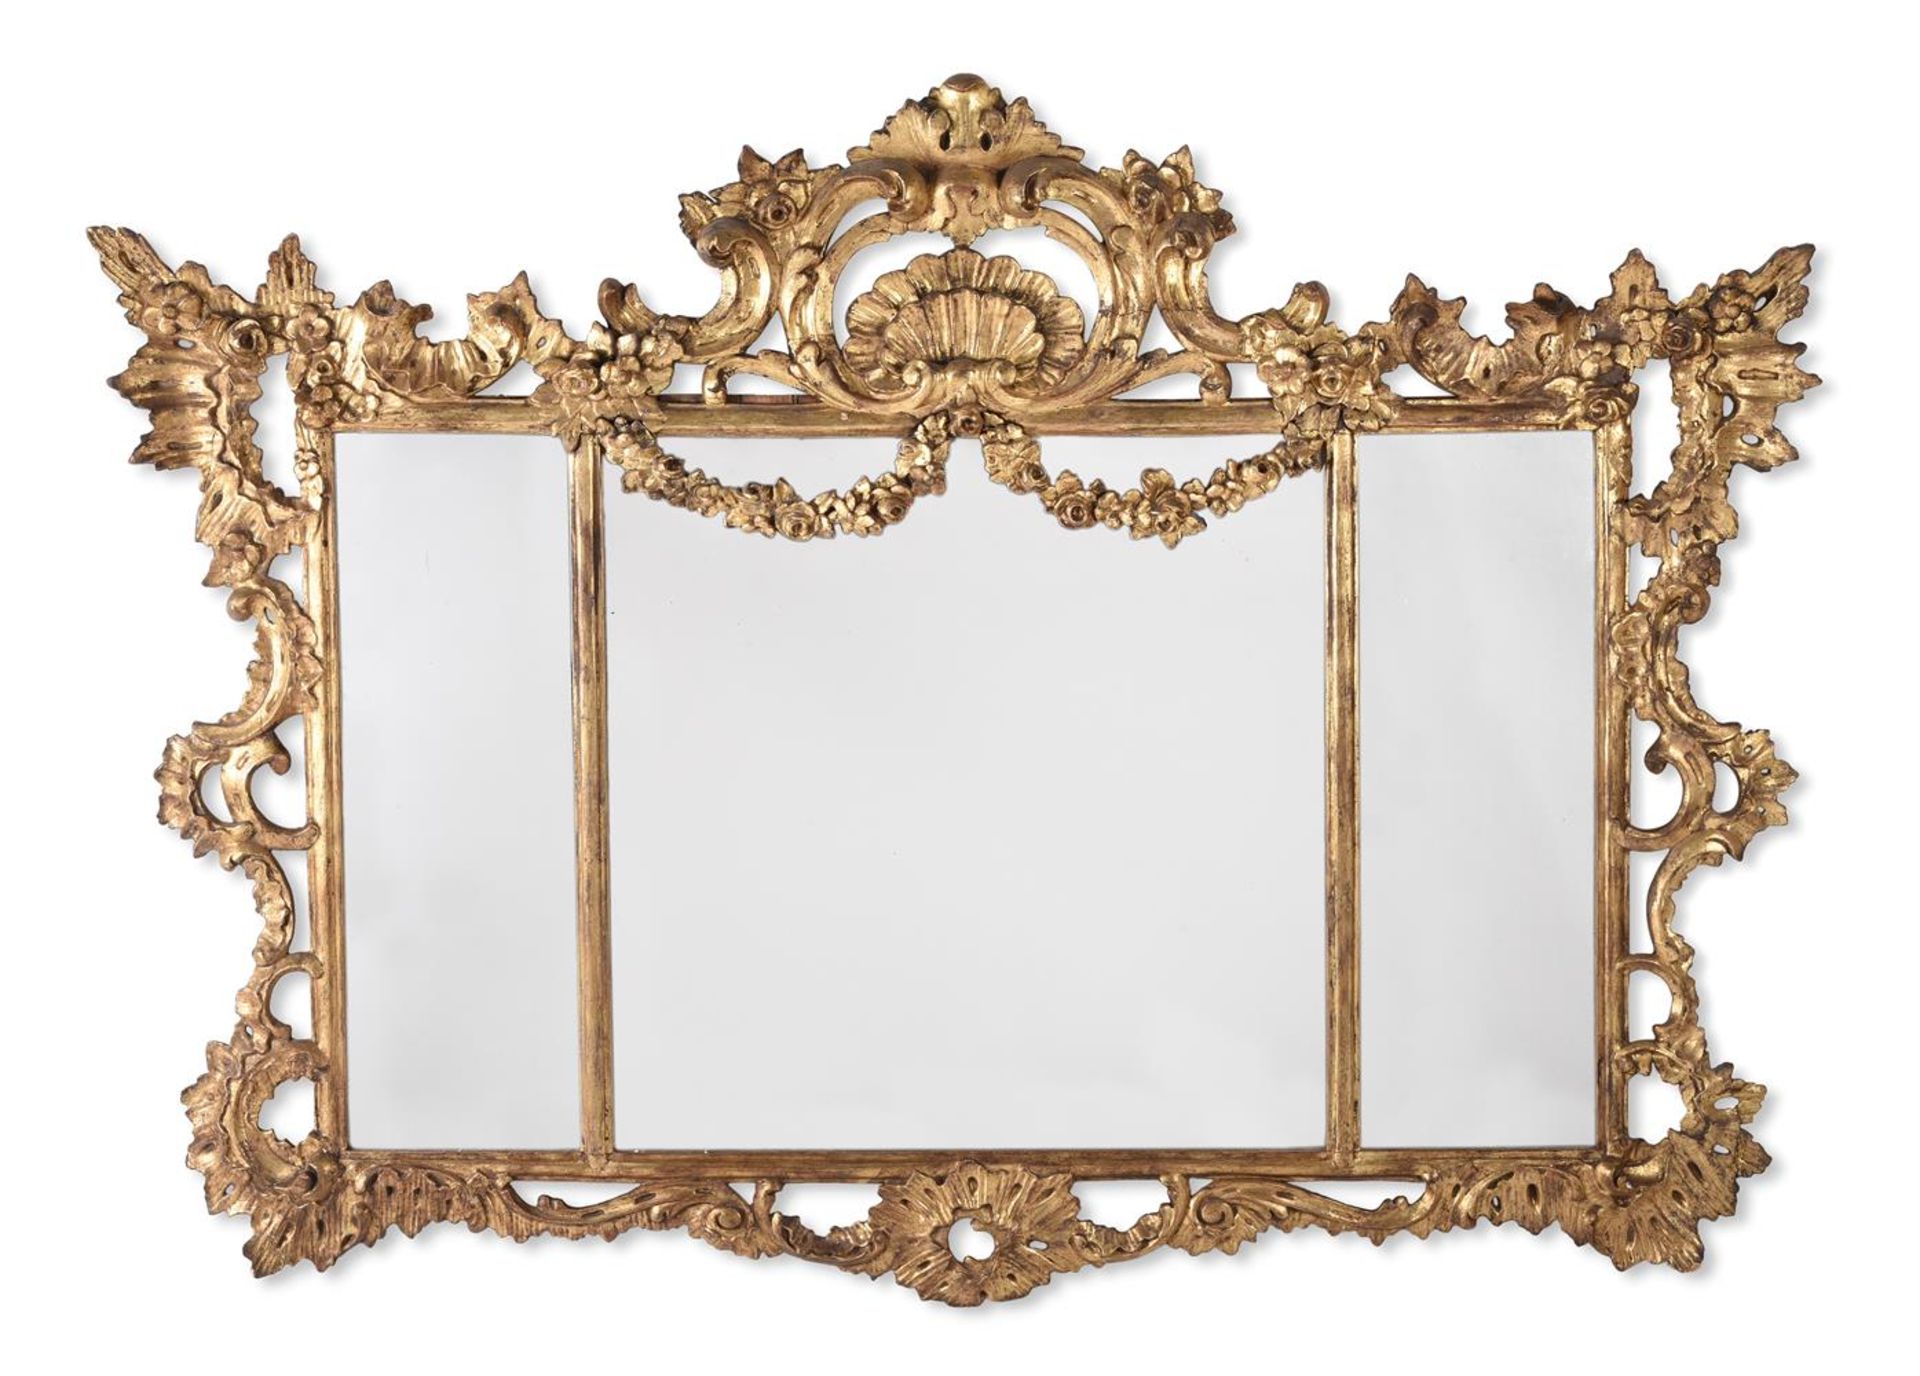 A LARGE CARVED GILTWOOD TRIPTYCH MIRROR, IN GEORGE III STYLE, MID 19TH CENTURY